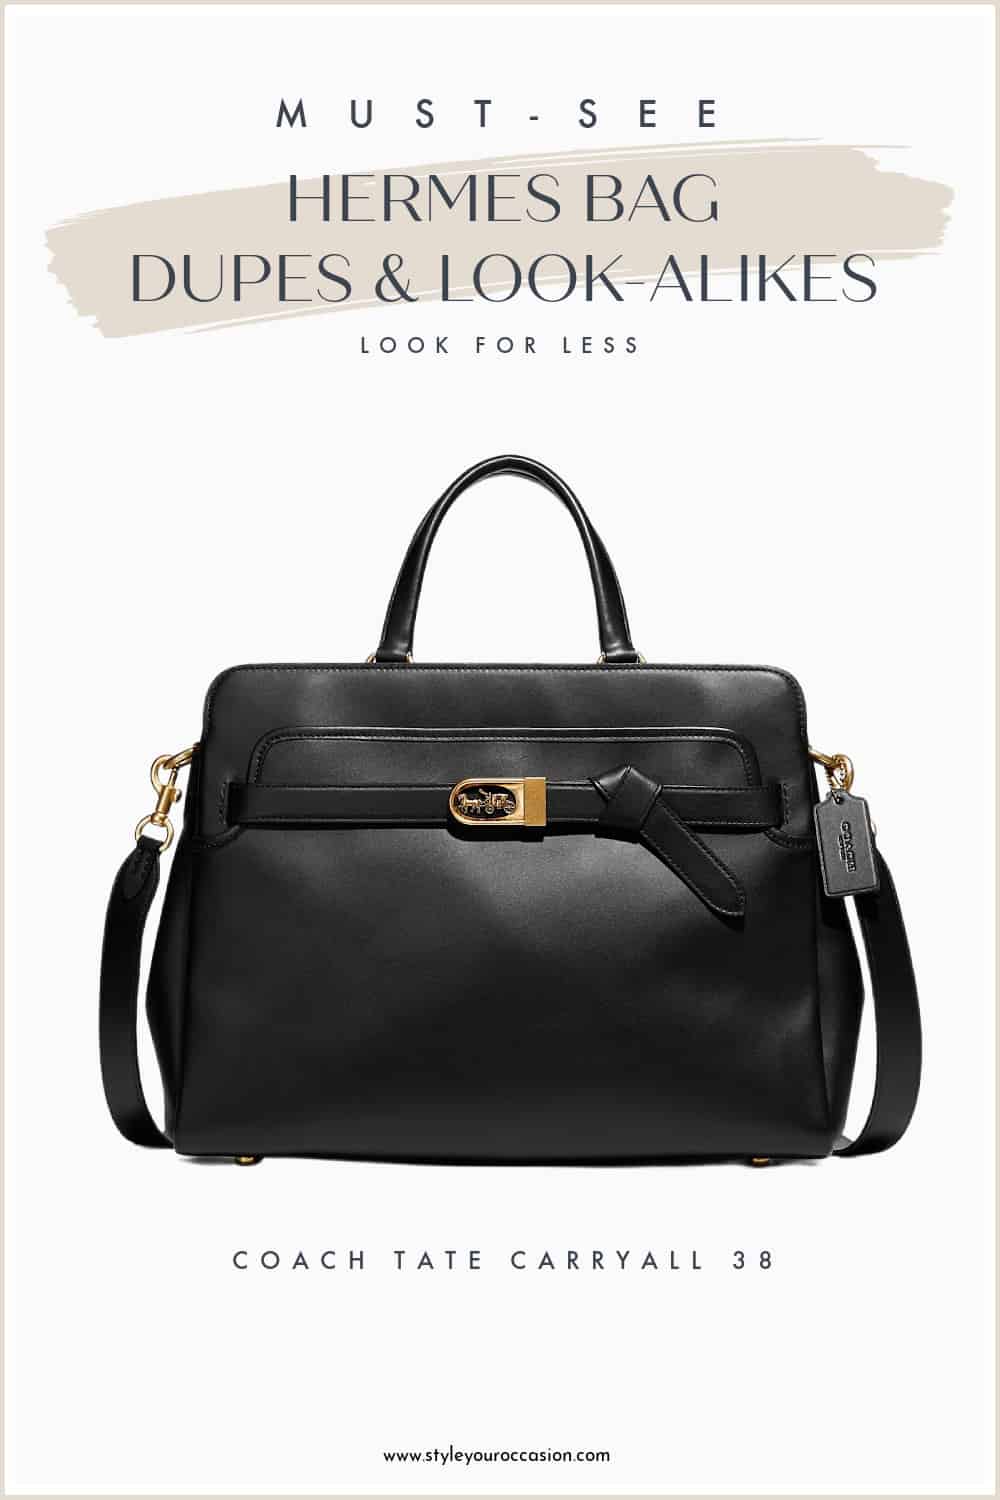 an image board of a black leather and gold Hermes look-alike handbag from Coach